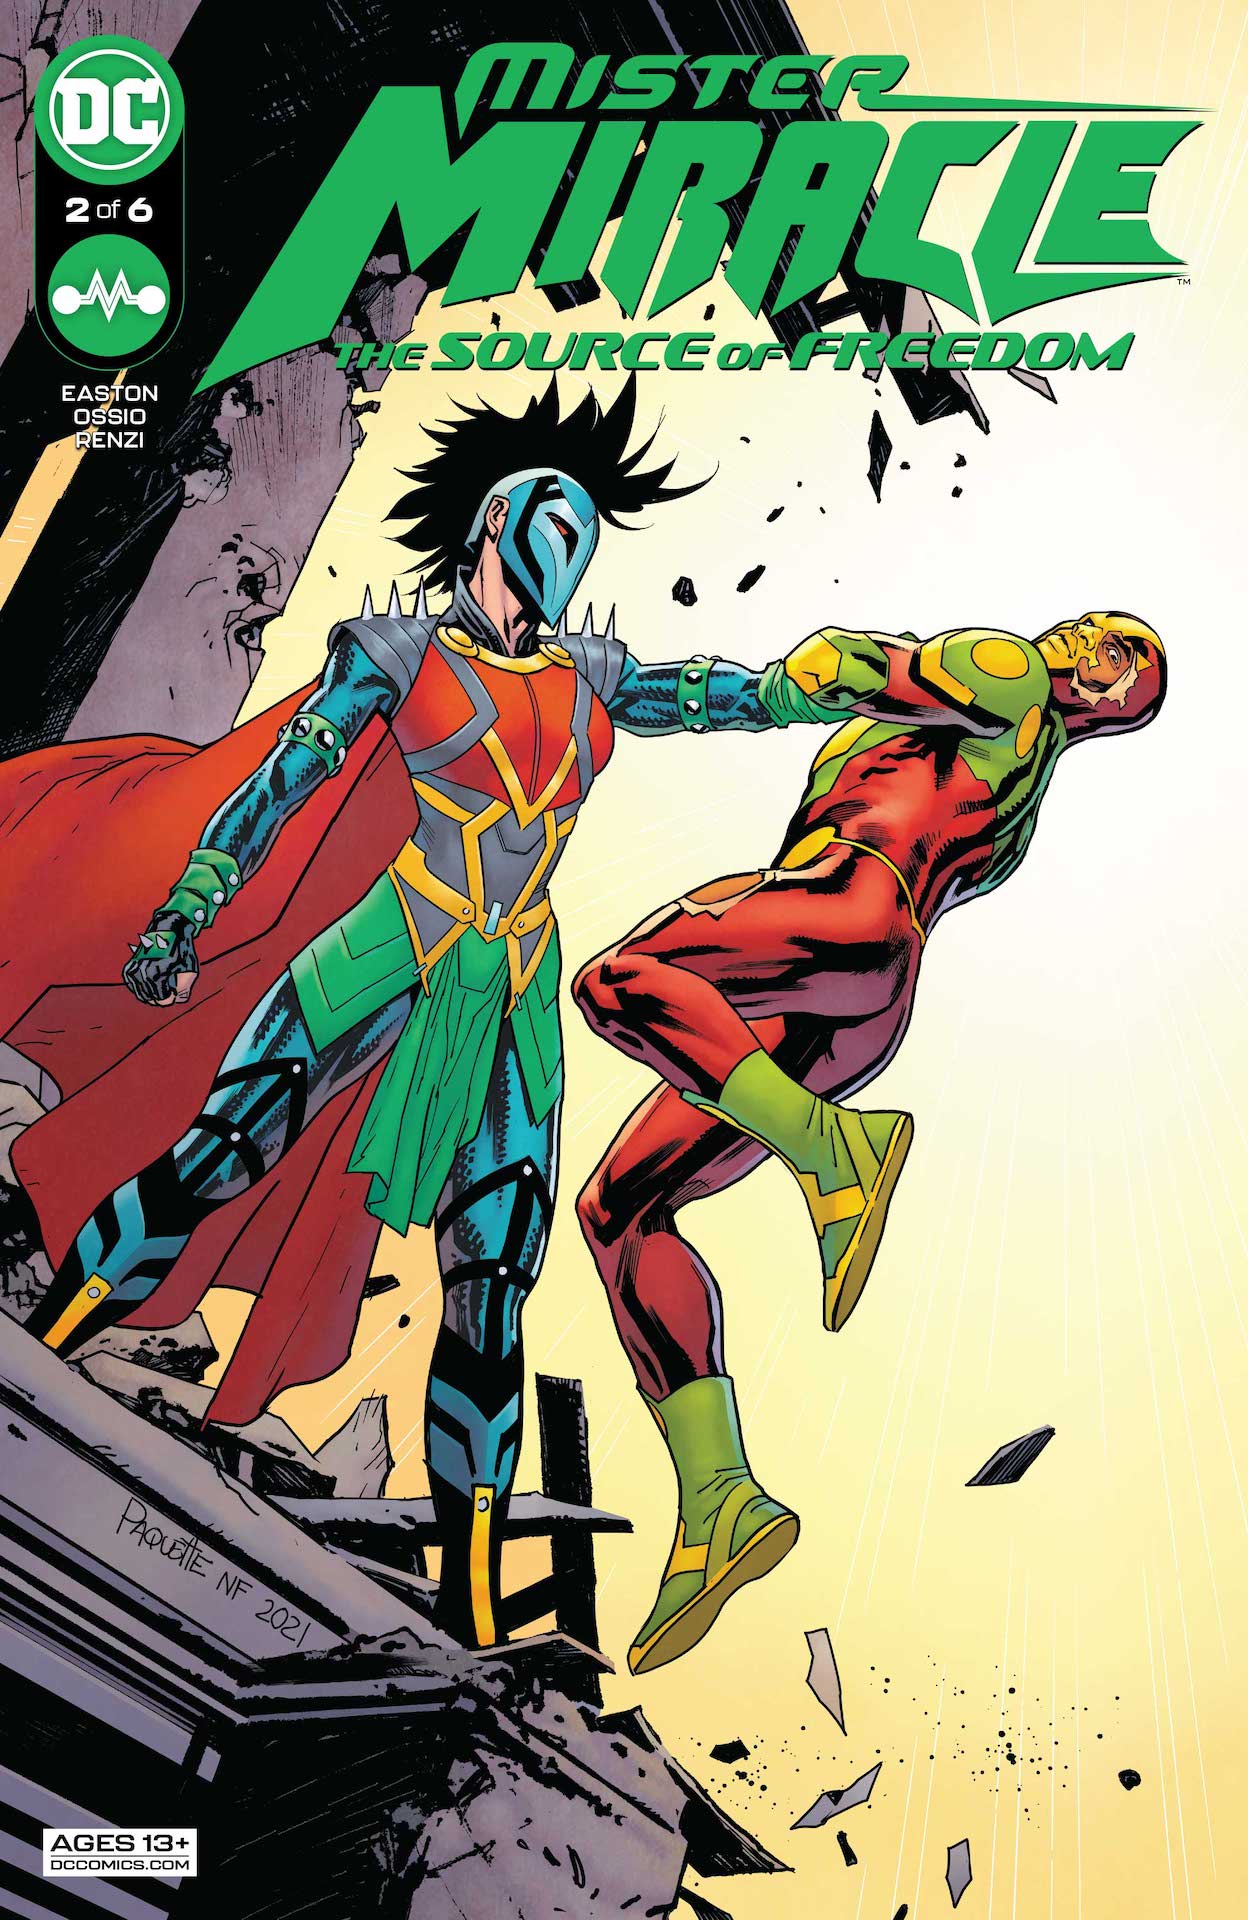 DC Preview: Mister Miracle #2: The Source of Freedom